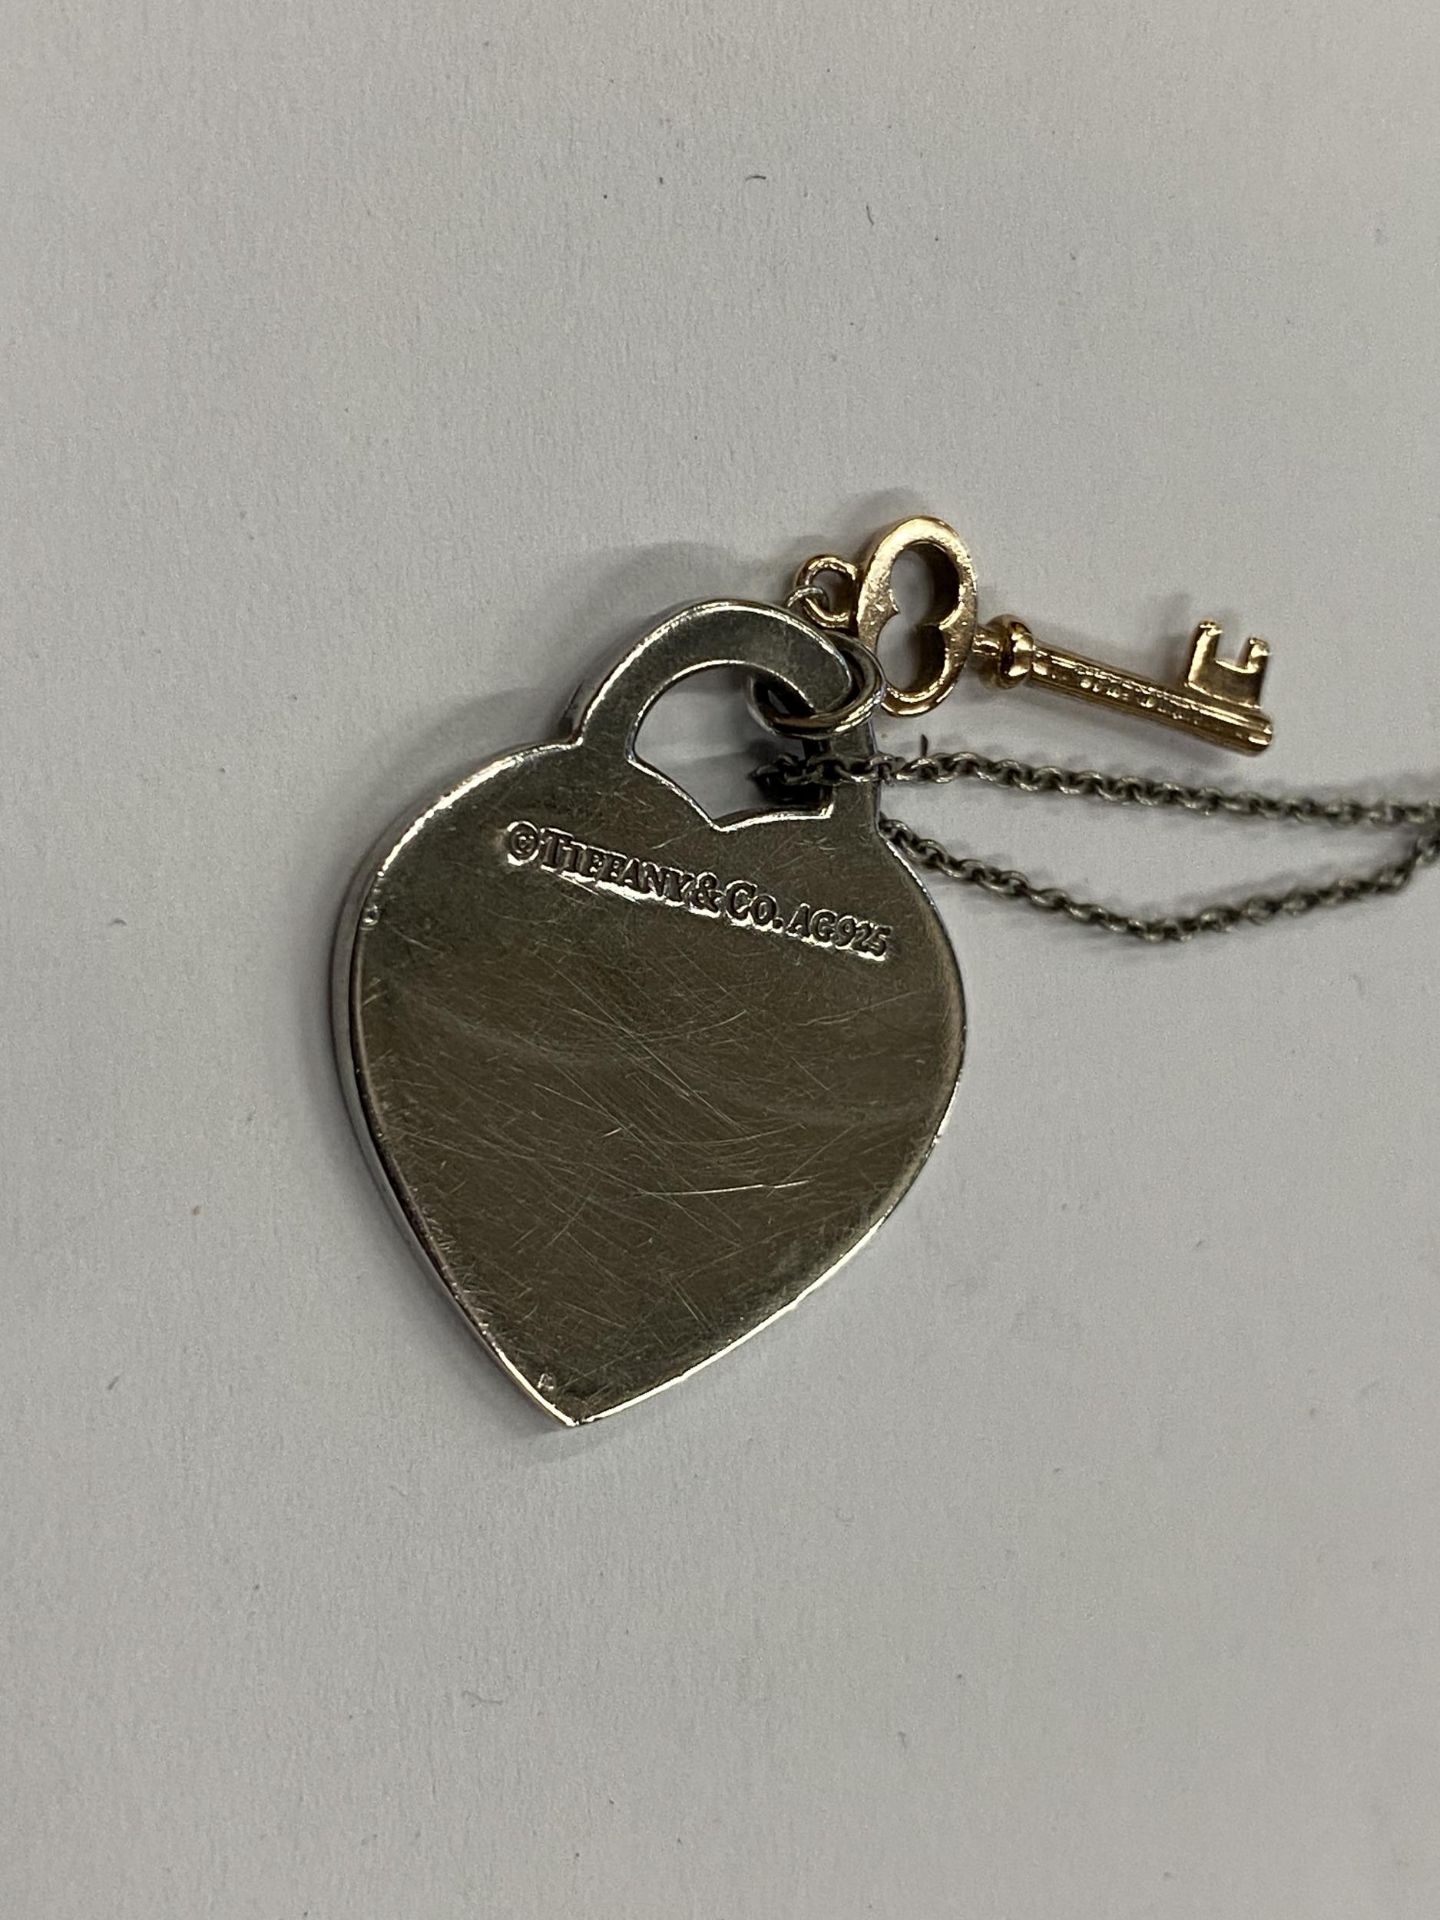 A TIFFANY & CO .925 SILVER HEART PENDANT NECKLACE WITH TIFFANY KEY & ORIGINAL RETAILER'S BOX - Image 6 of 8